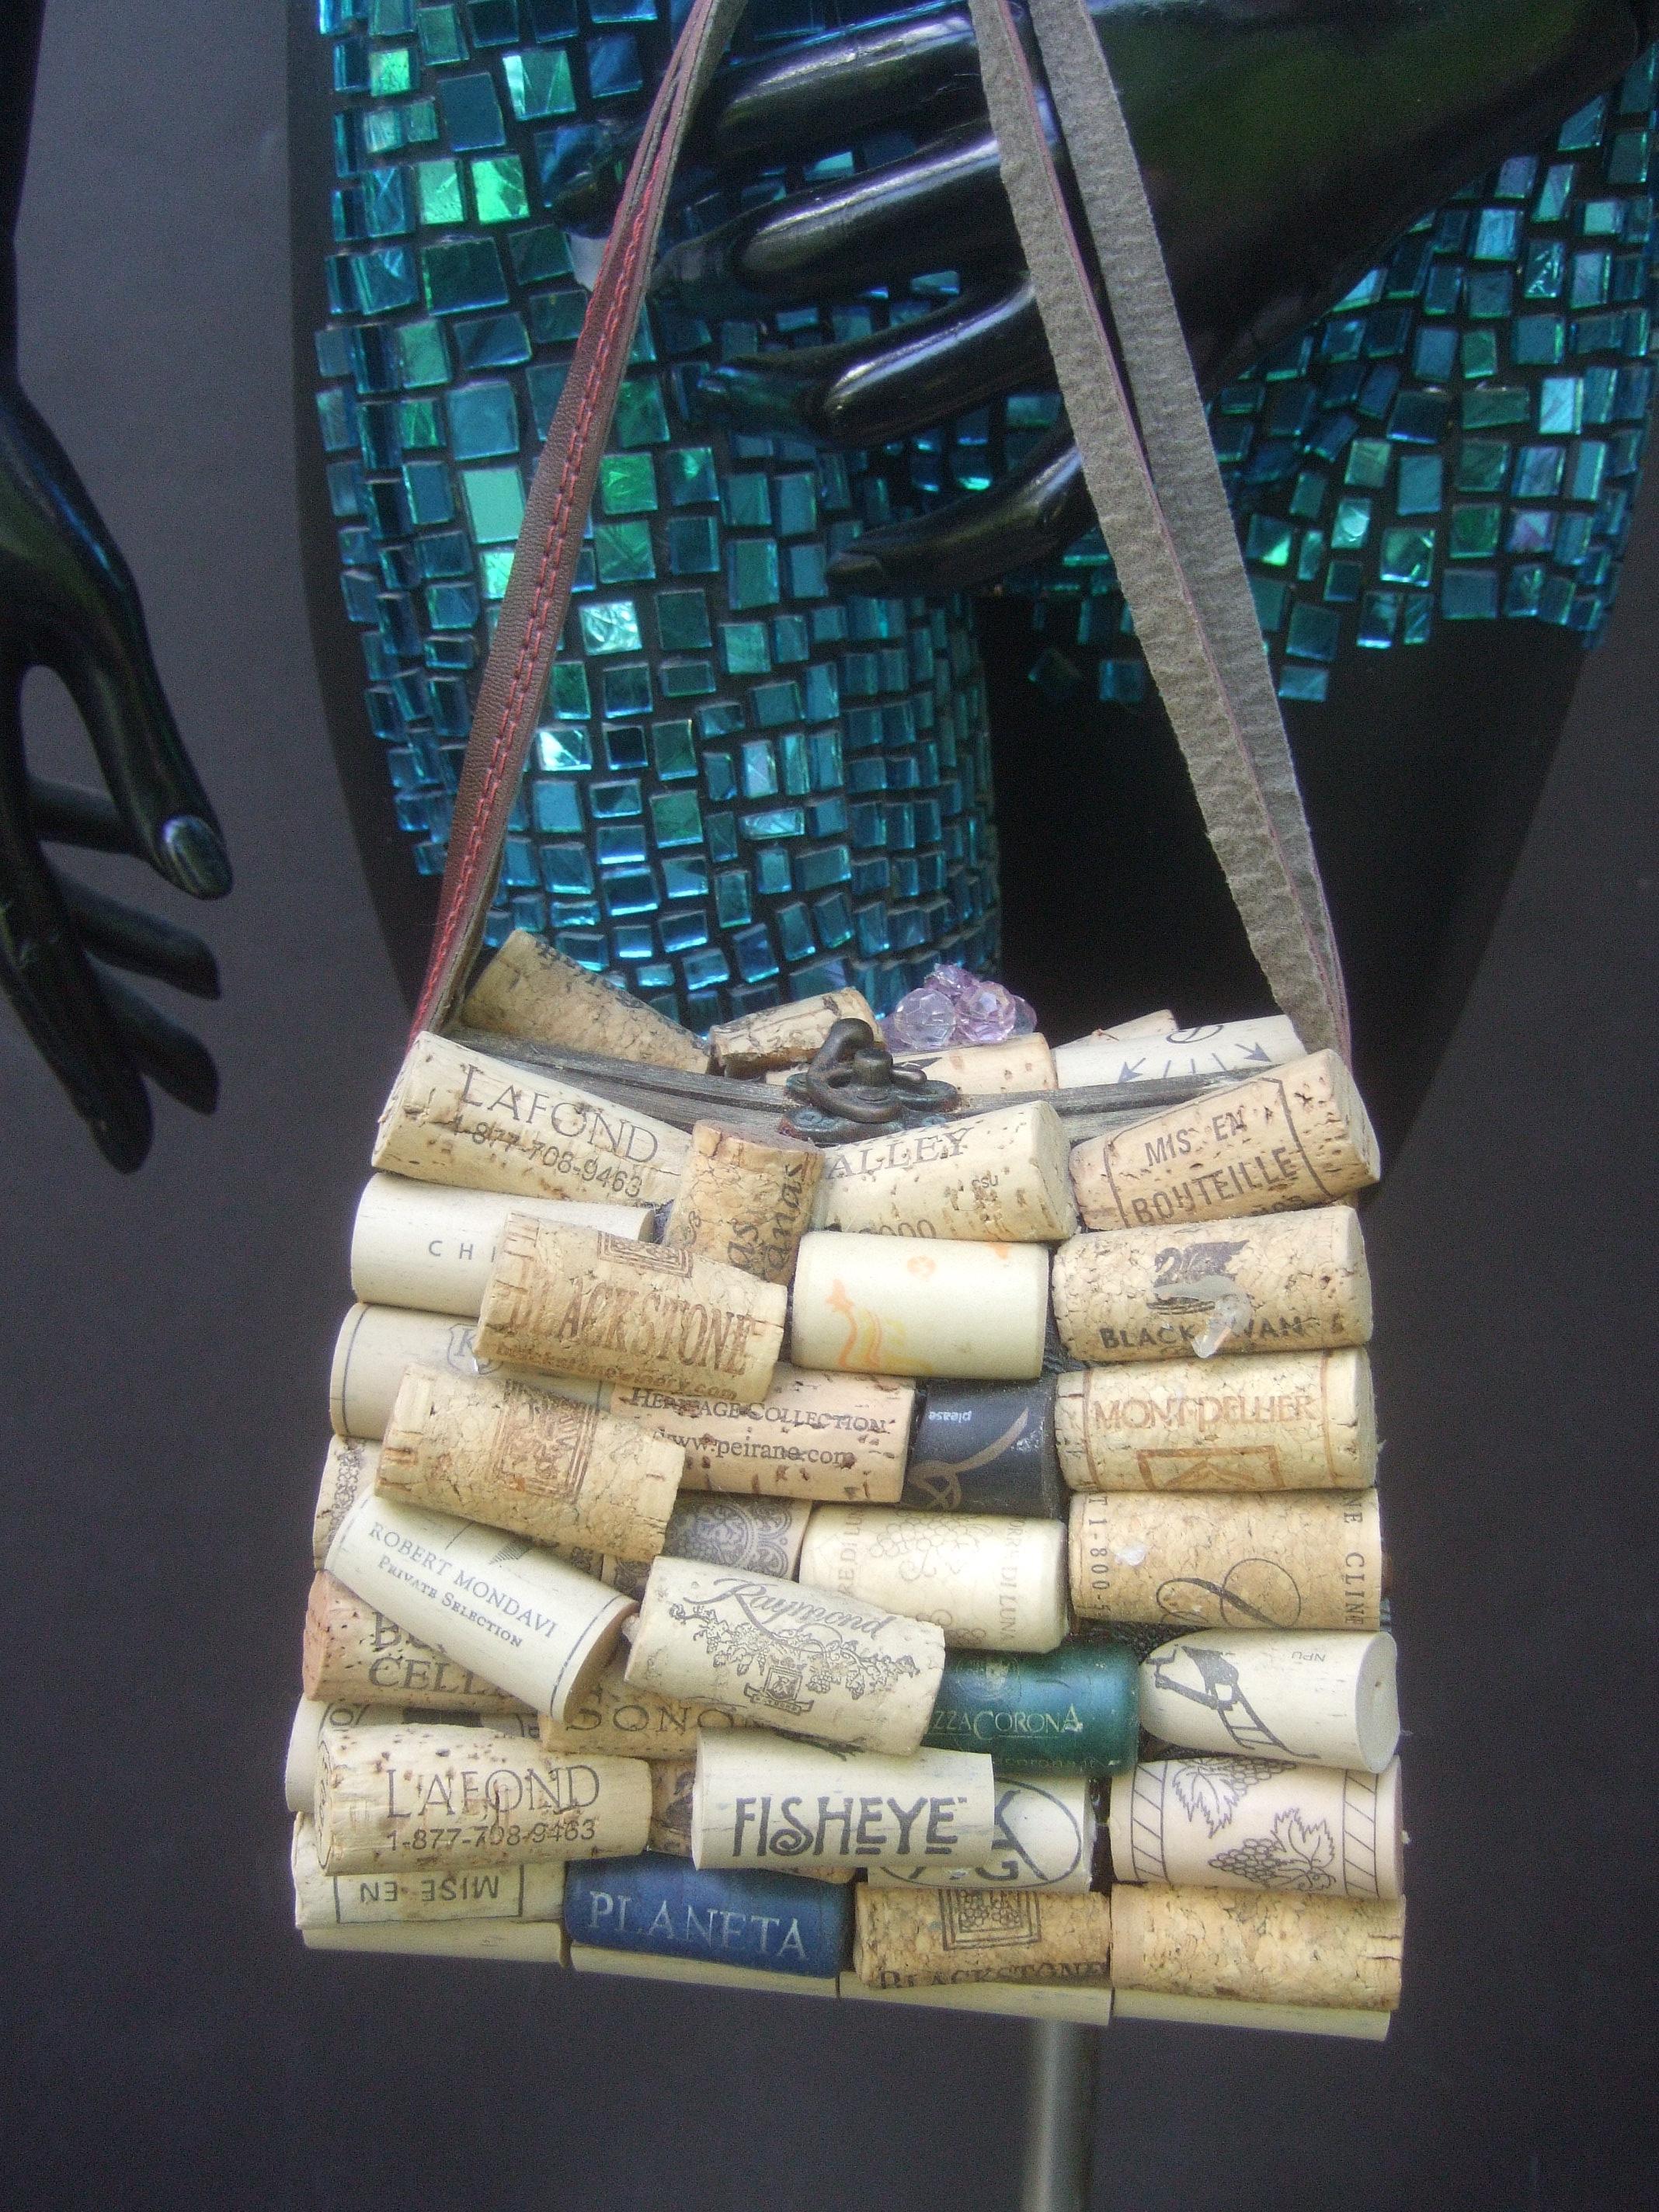 Whimsical wine cork wood box purse handbag c 1980s
The quirky wood box purse is decorated with a collection of wine bottle corks 
on both exterior front & back sides. The sides of the wood box purse are accented with a few foil
wine bottle